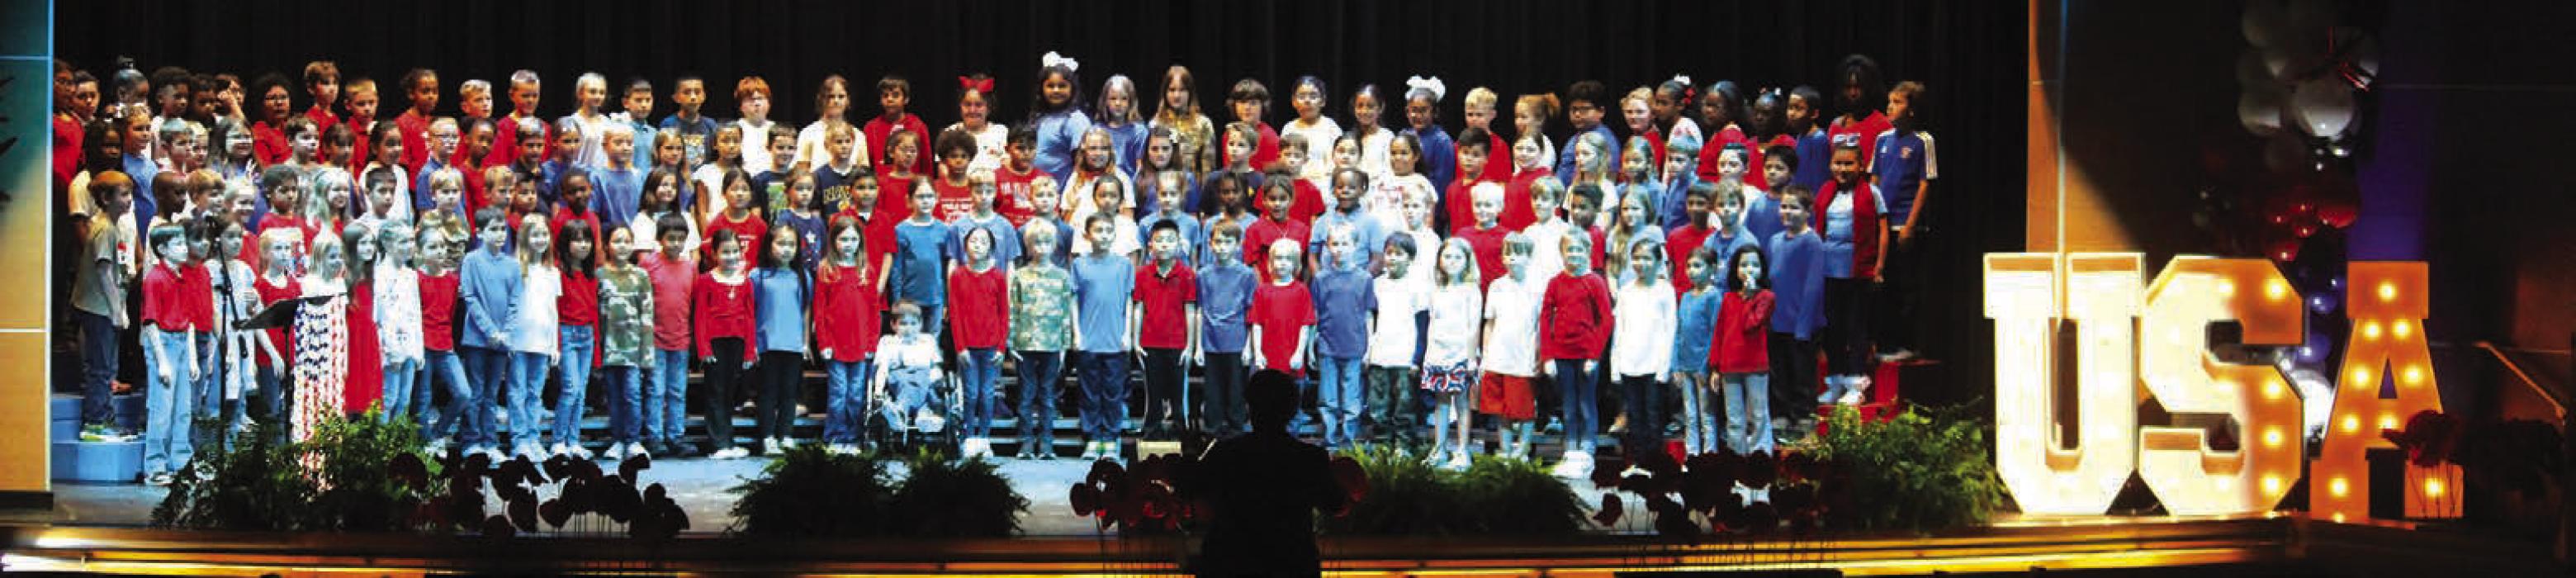 A photo from the La Grange elementary school Veterans Day Program Friday, where each class sang several patriotic songs. Photo by Jeff Wick